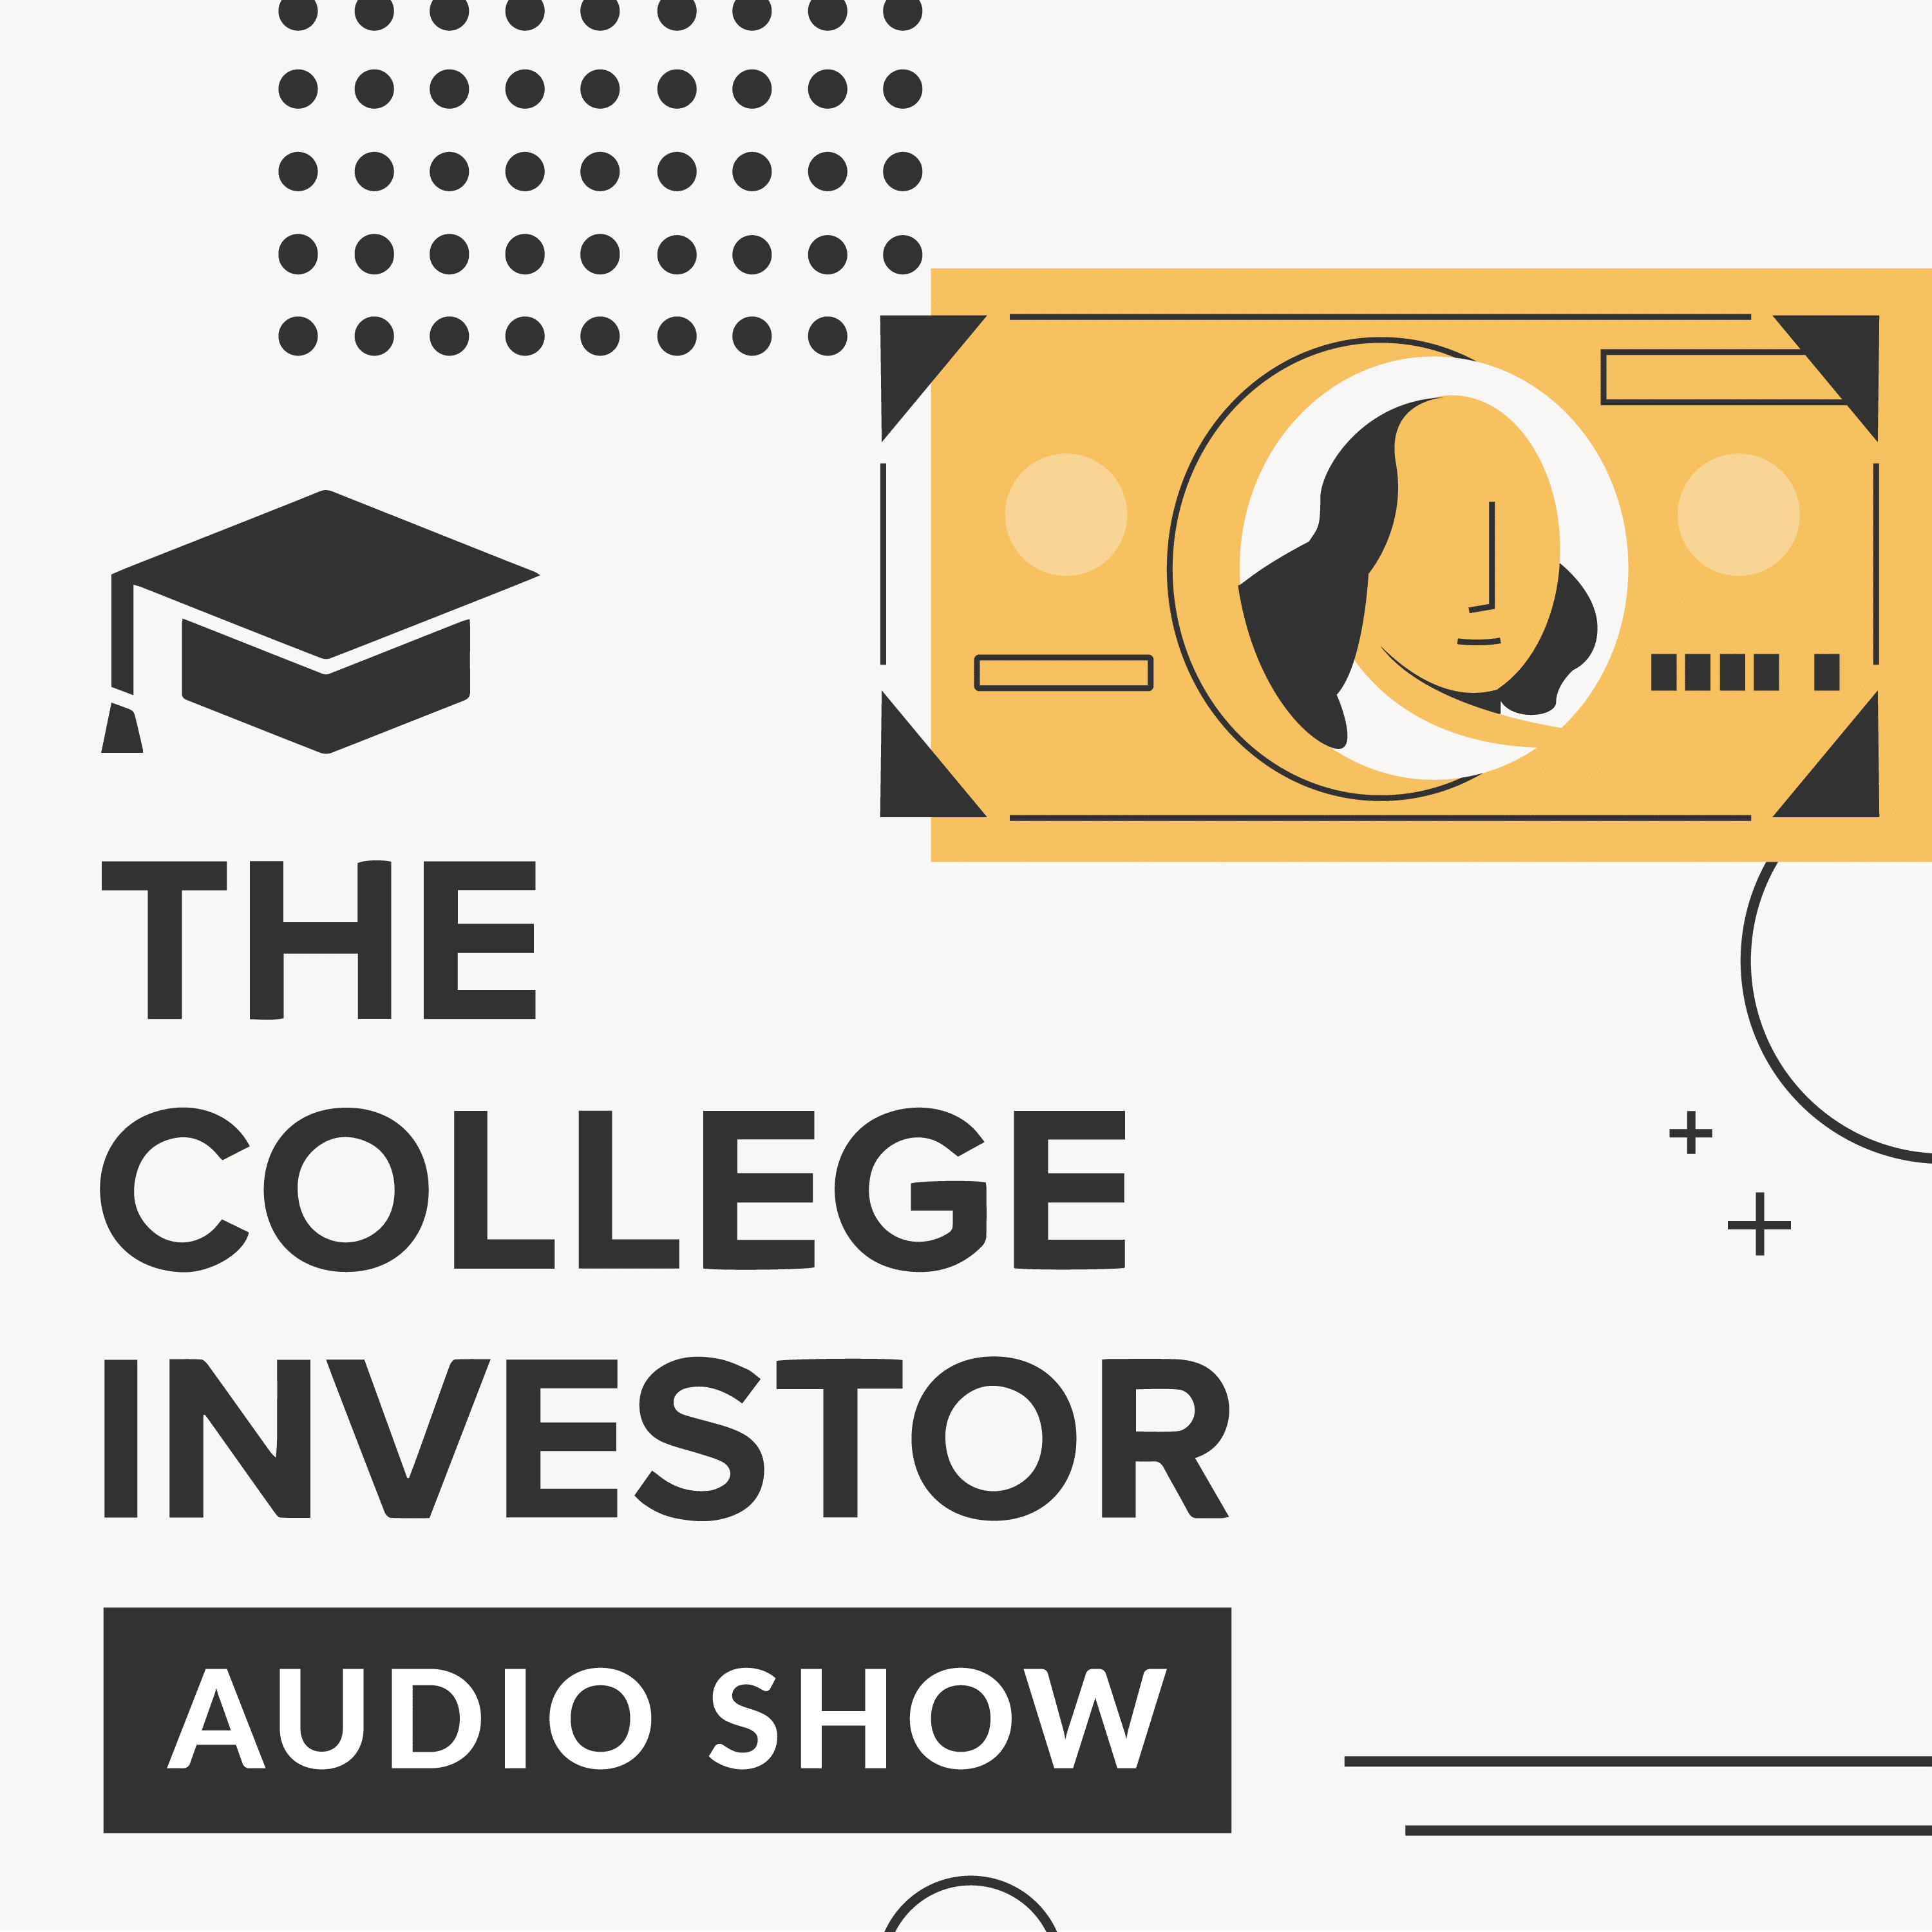 The College Investor Audio Show Cover 2021